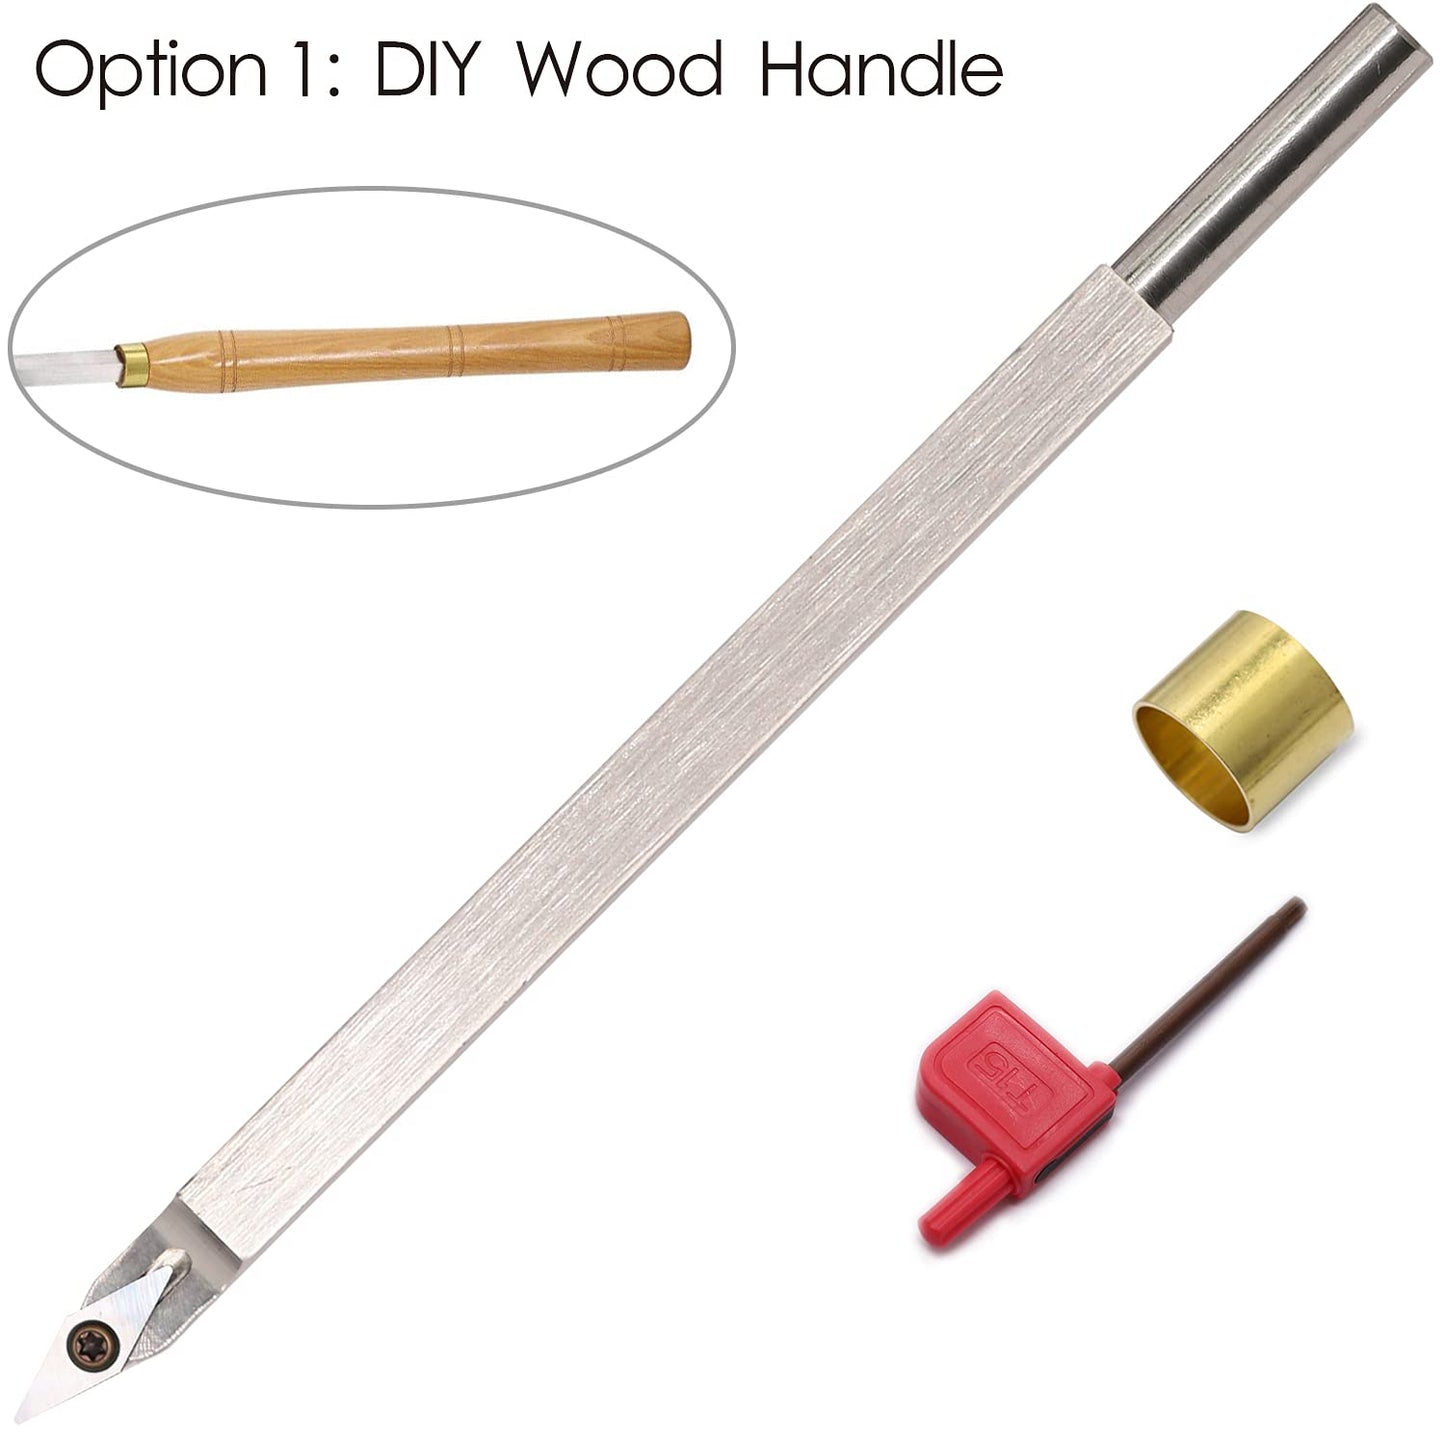 Woodturning Tools Carbide Tipped Lathe Chisel Radius Detailer Tool Bar 10 Inches Blades Gouge Skew Spear 35°R With Ci4 Diamond Carbide Insert for